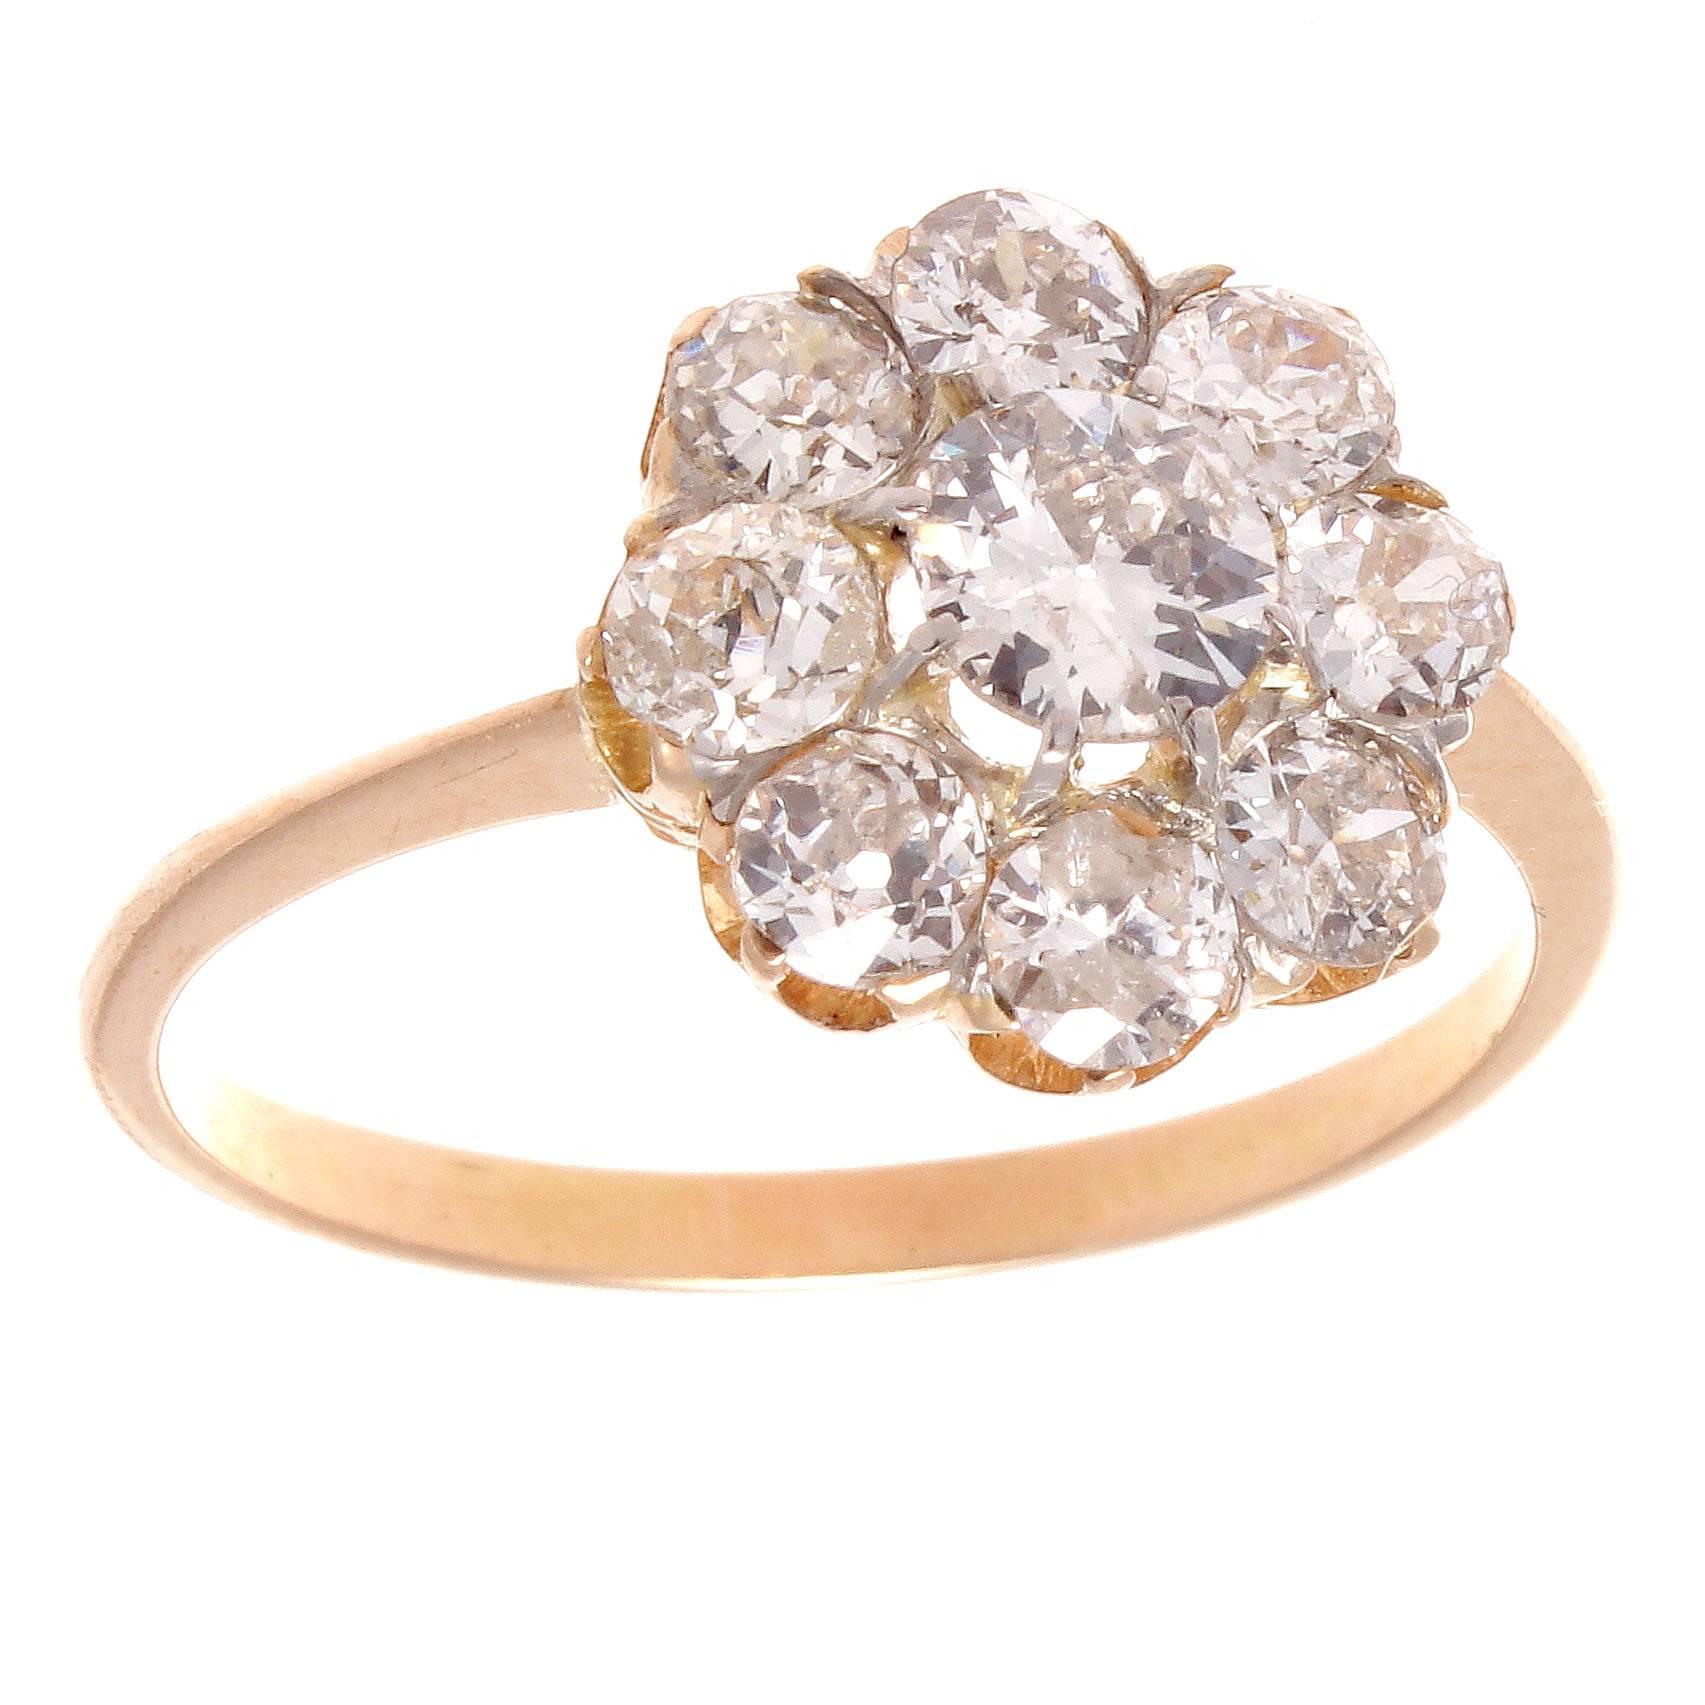 A creation of true beauty. It has long been thought that the cluster ring was originally inspired by the colorful flowers found in nature. Designed with 8 old European colorless diamonds surrounding the center diamond.  Hand crafted in 18k